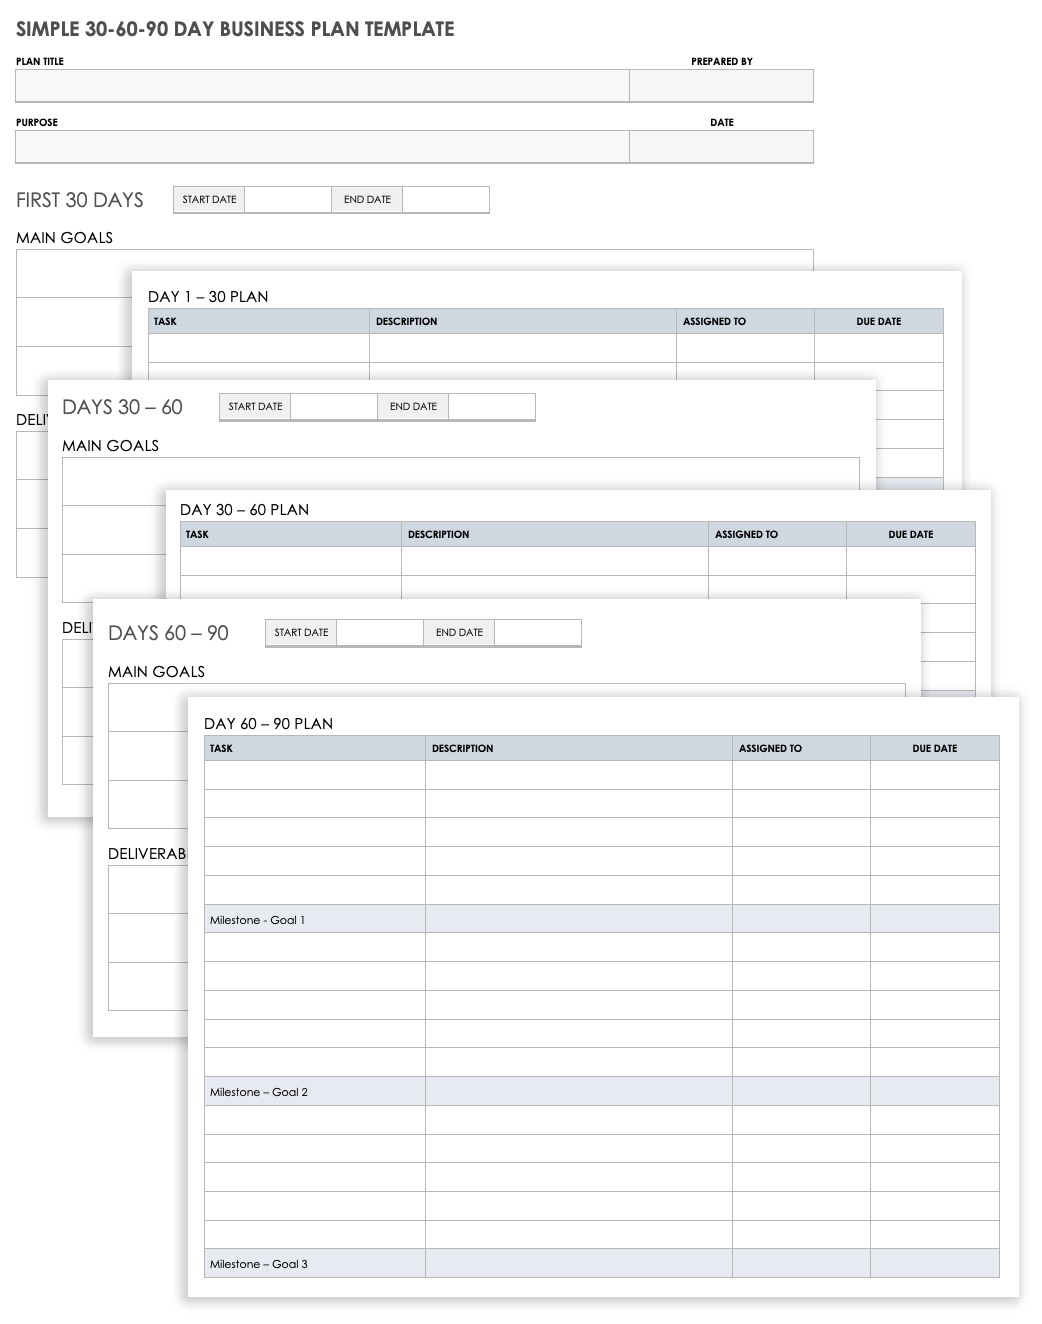 Free 21-21-21-Day Business Plan Templates  Smartsheet Inside 30 60 90 Day Plan Template Word